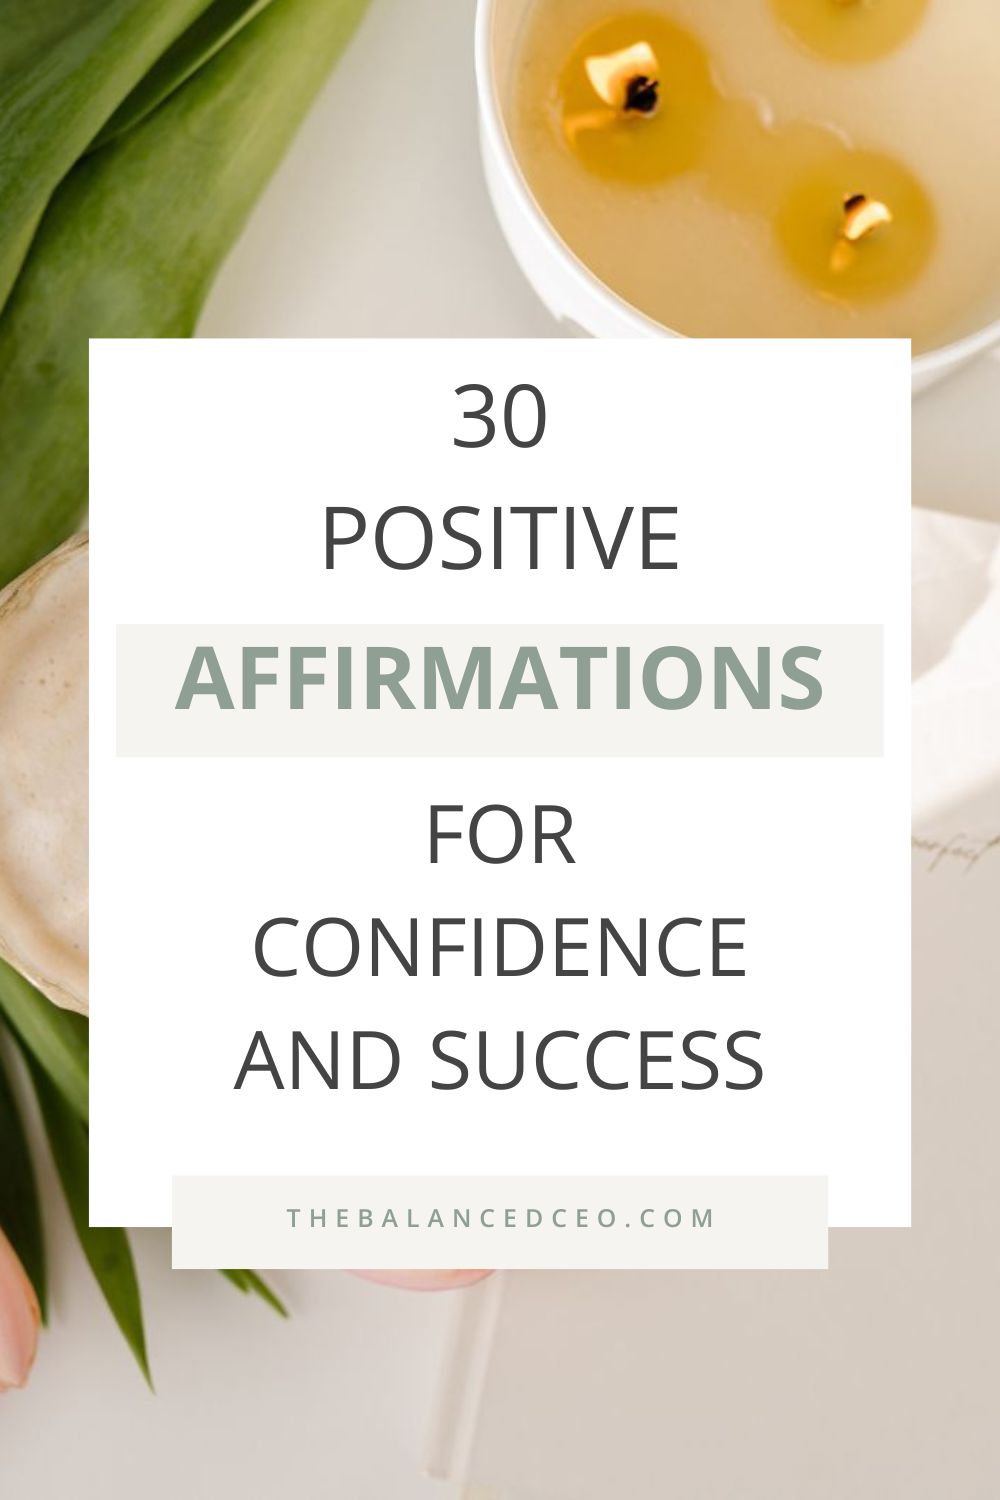 30 Positive Affirmations for Confidence and Success